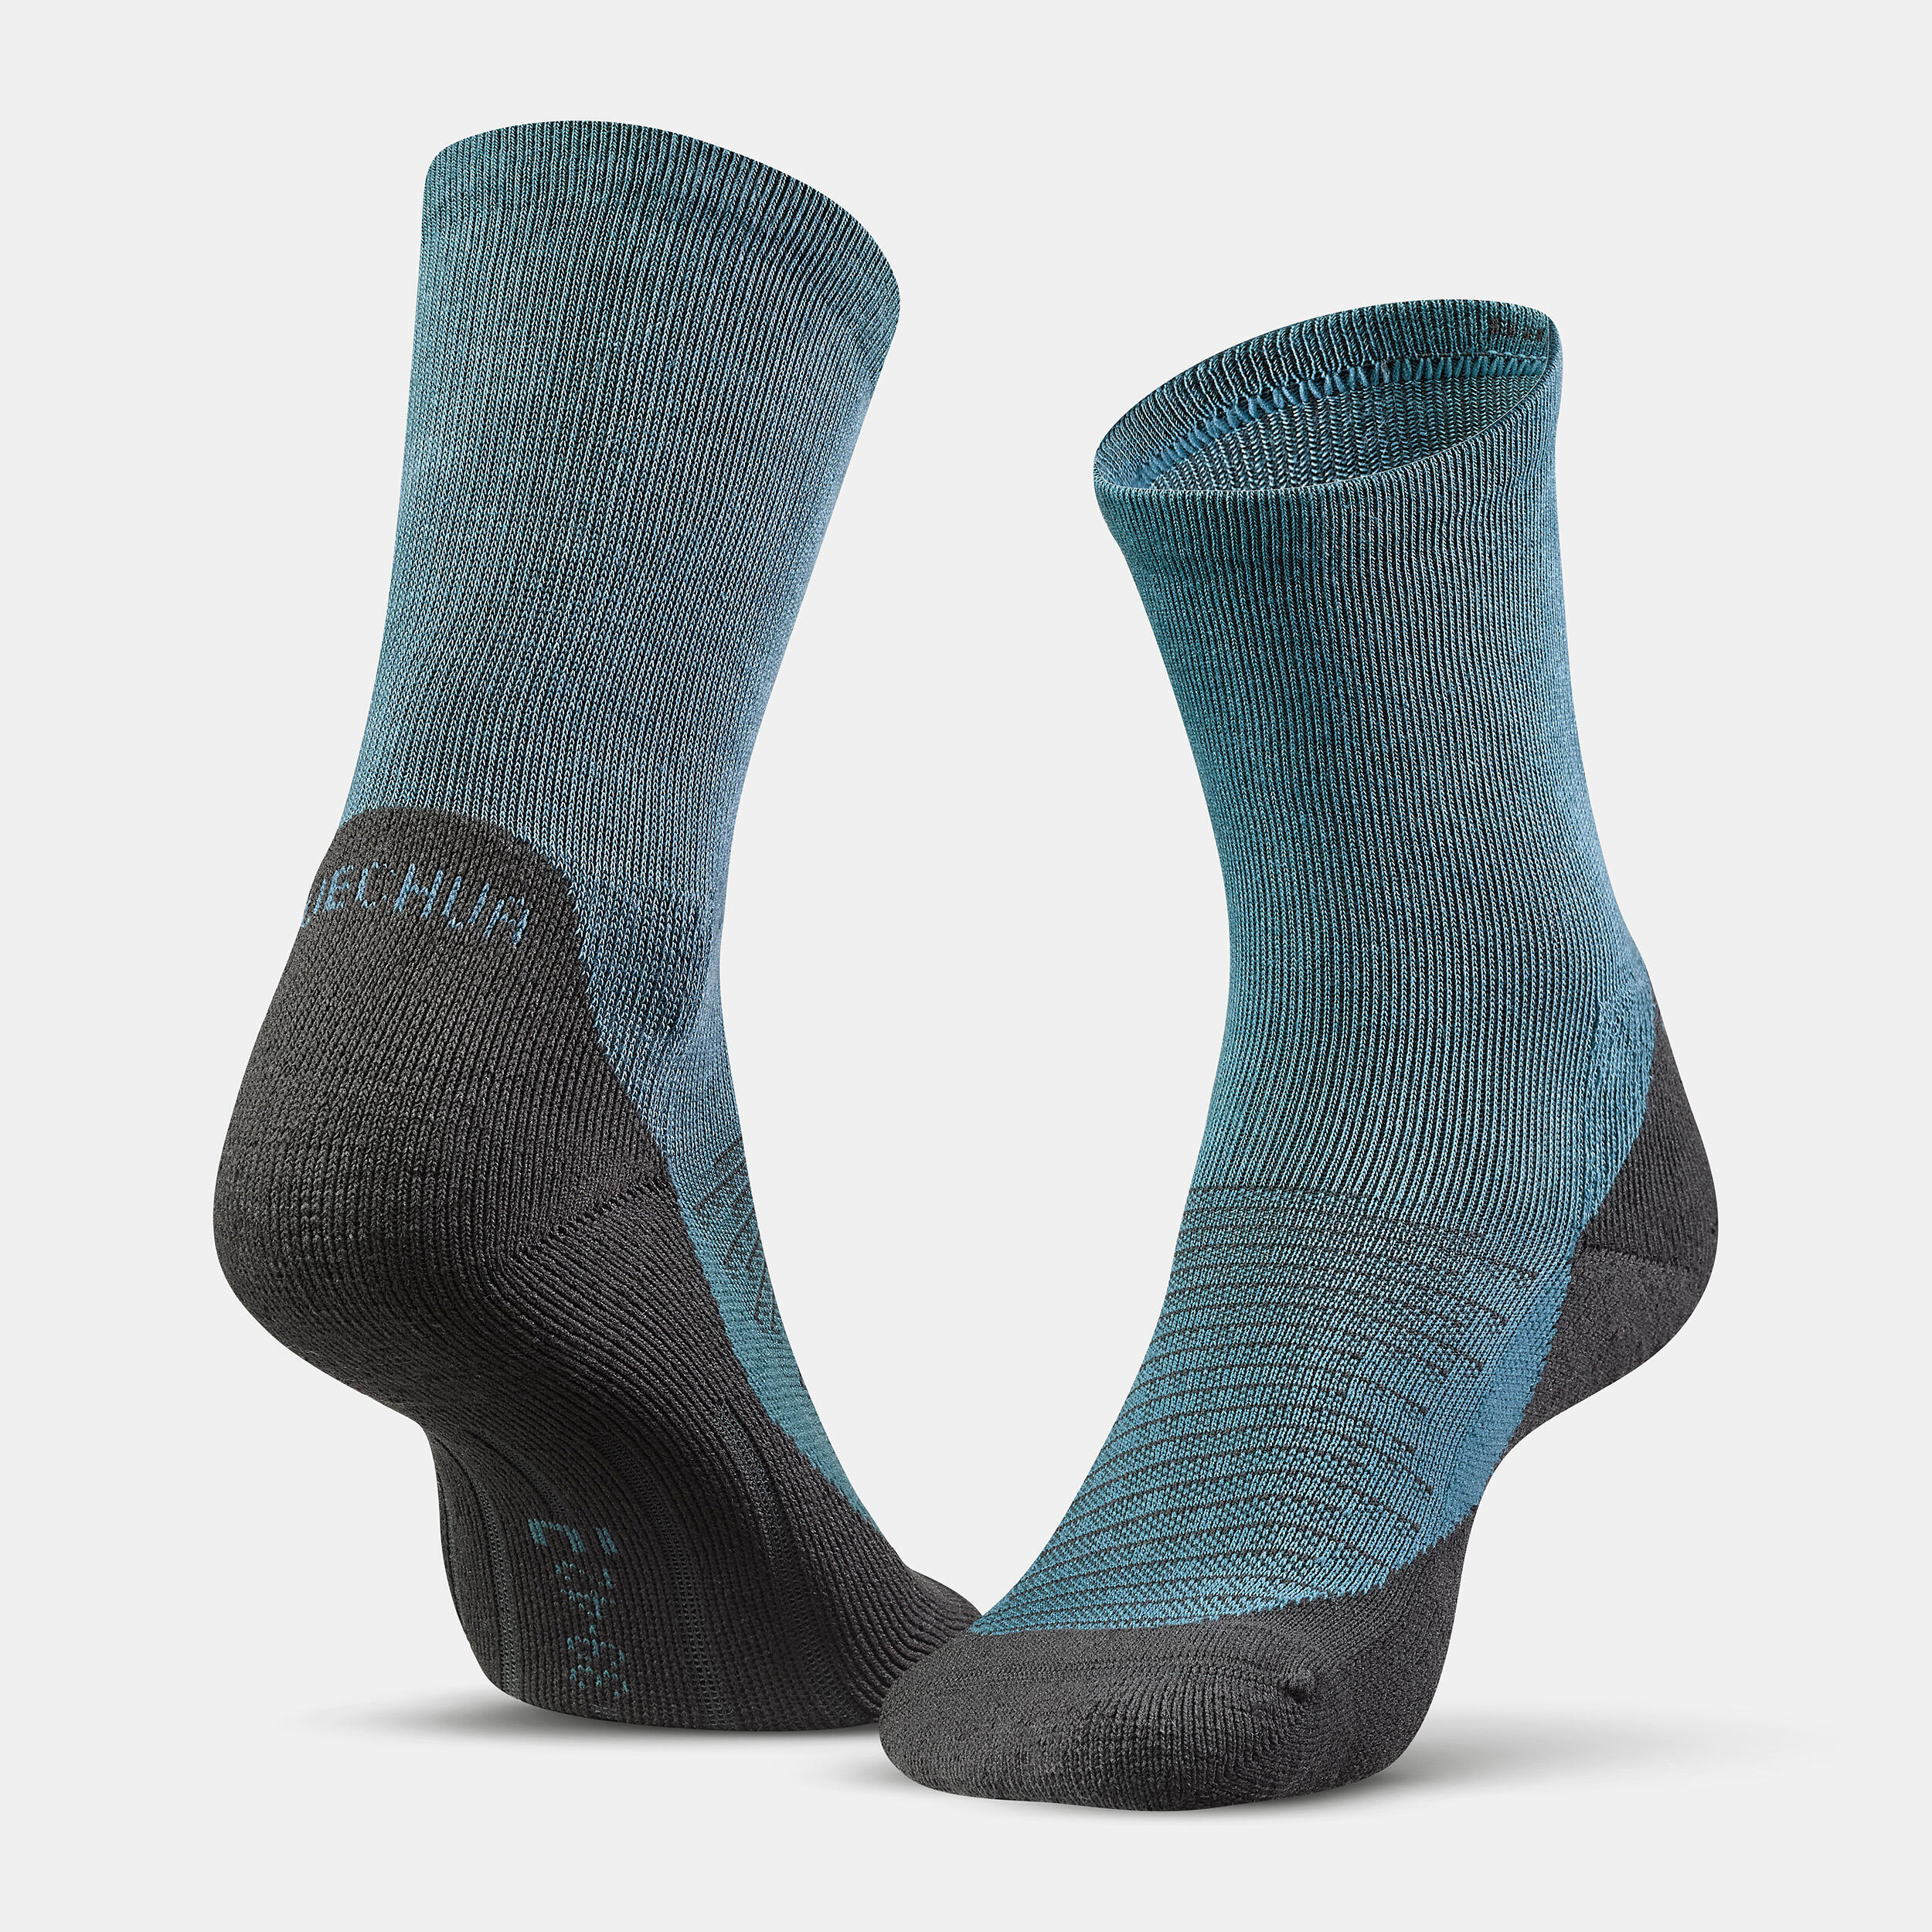 Sock Hike 100 High  - Pack of 2 pairs - Grey and Blue 3/9